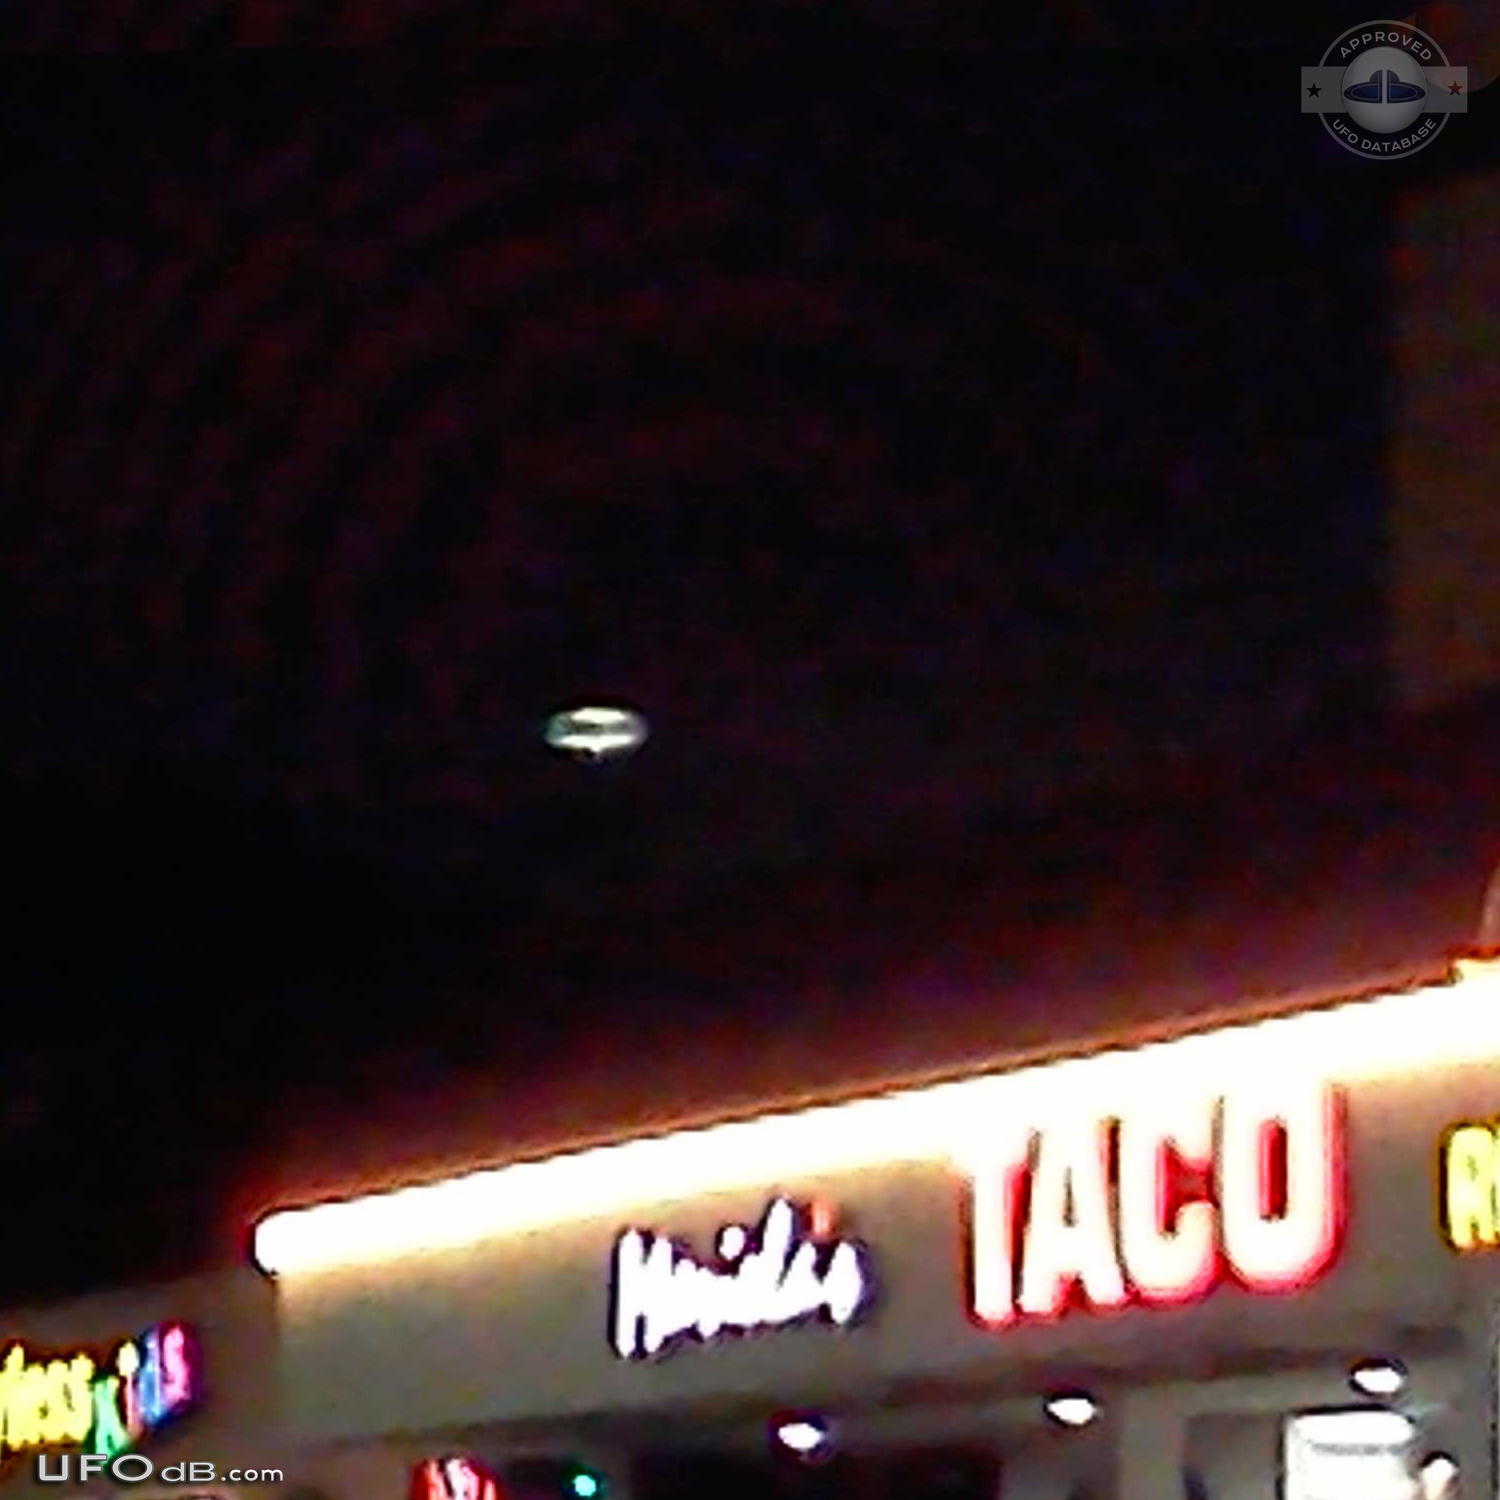 Man take picture of UFO he taught it was a blimp - Los Angeles 2011 UFO Picture #389-1